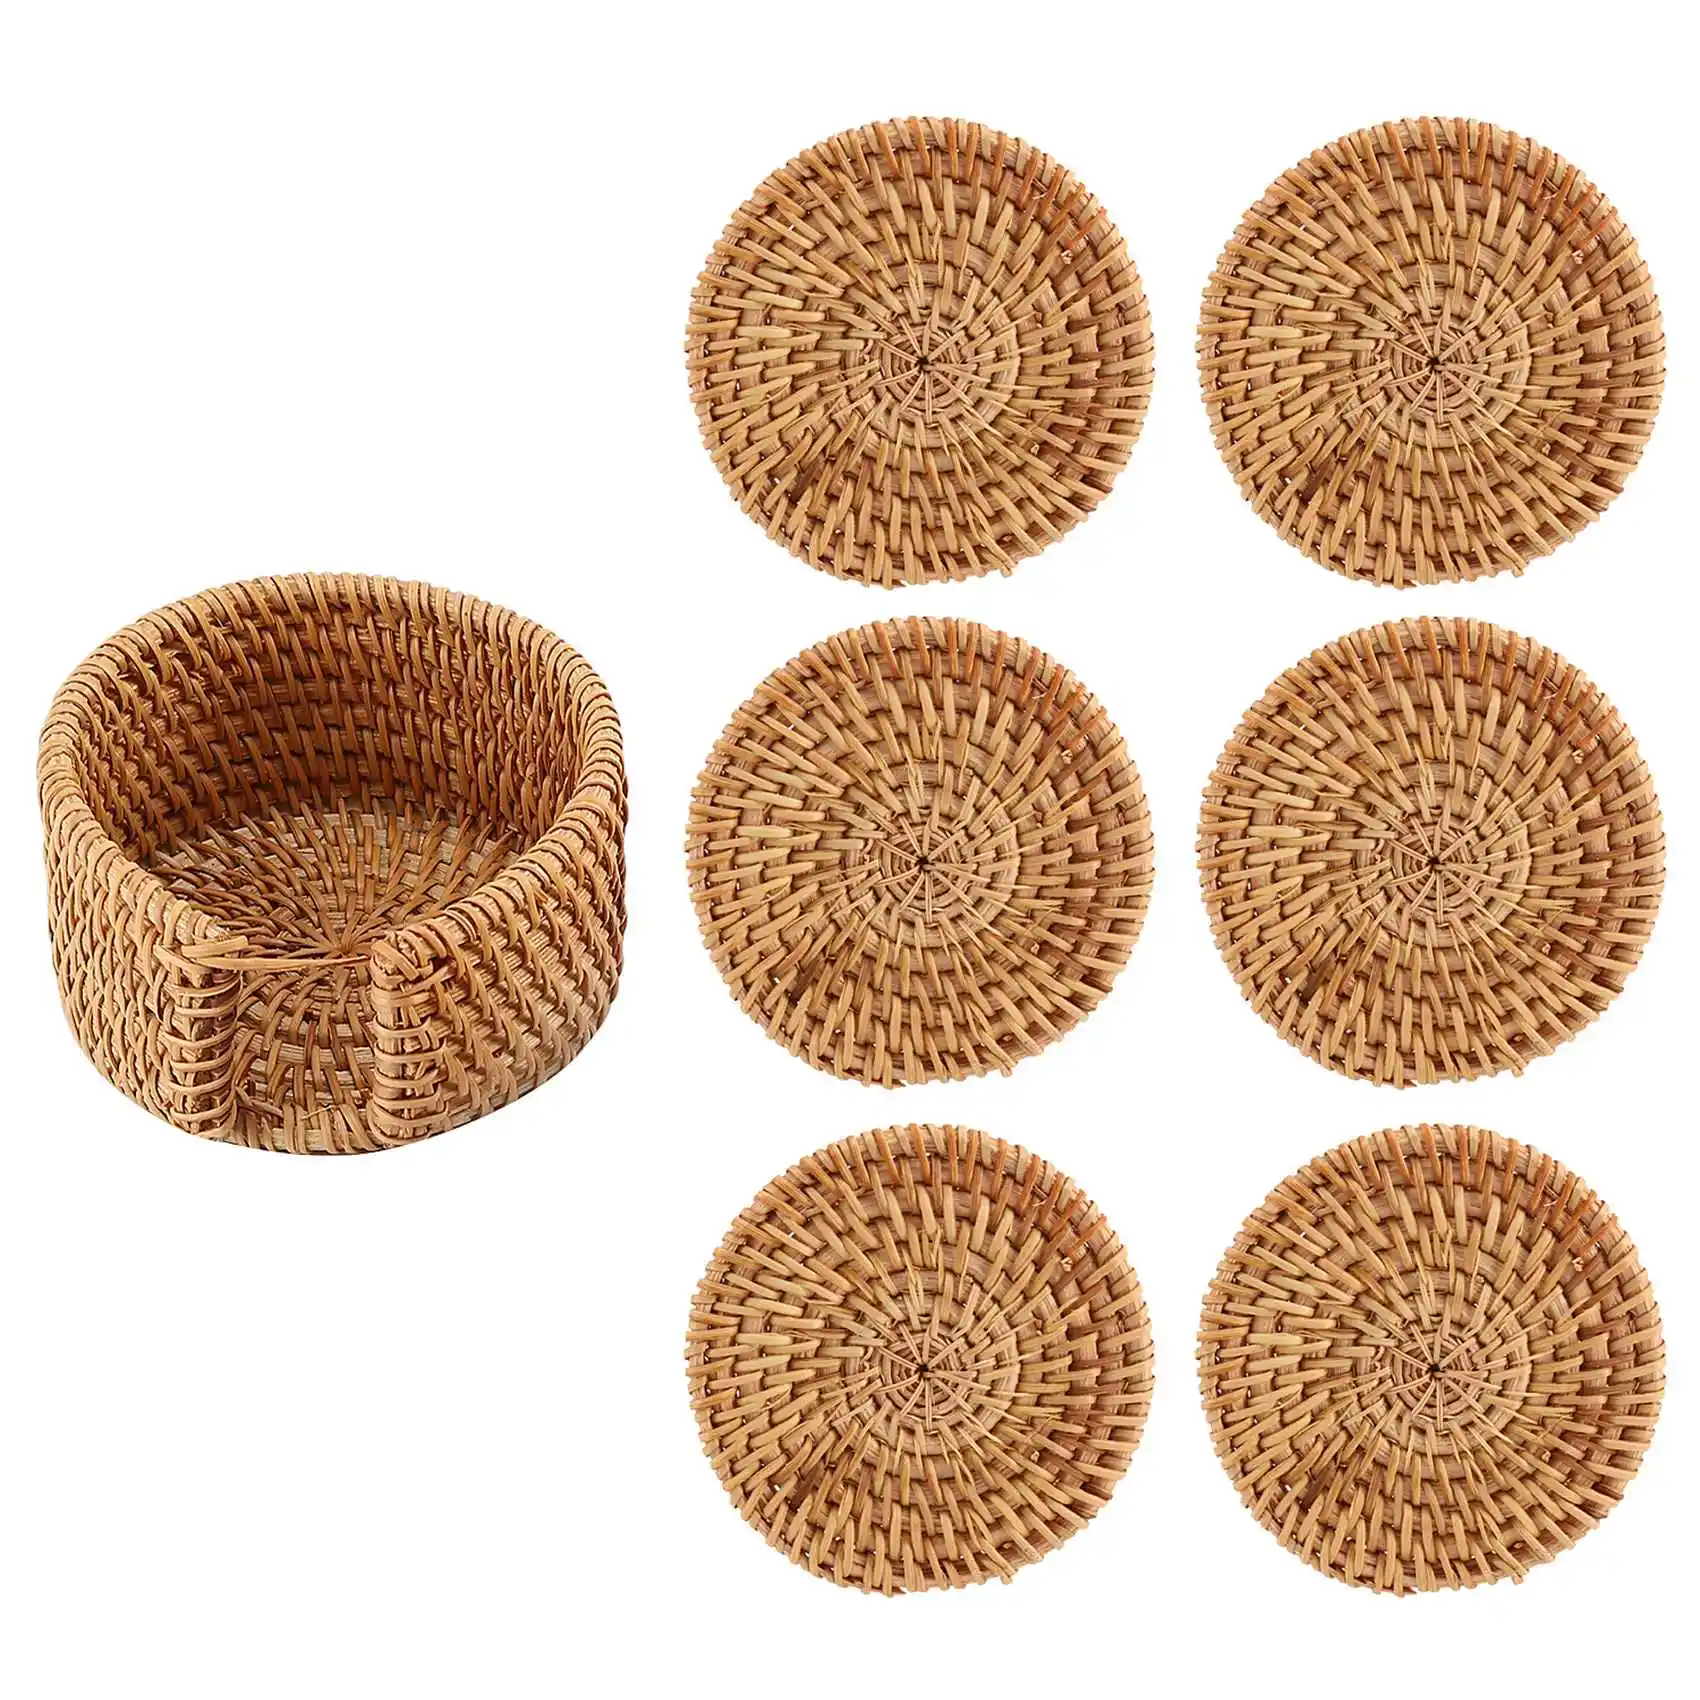 

6Pcs/Lot Drink Coasters Set for Tea Accessories Round Tableware Placemat Dish Mat Rattan Weave Cup Mat Pad 8cm